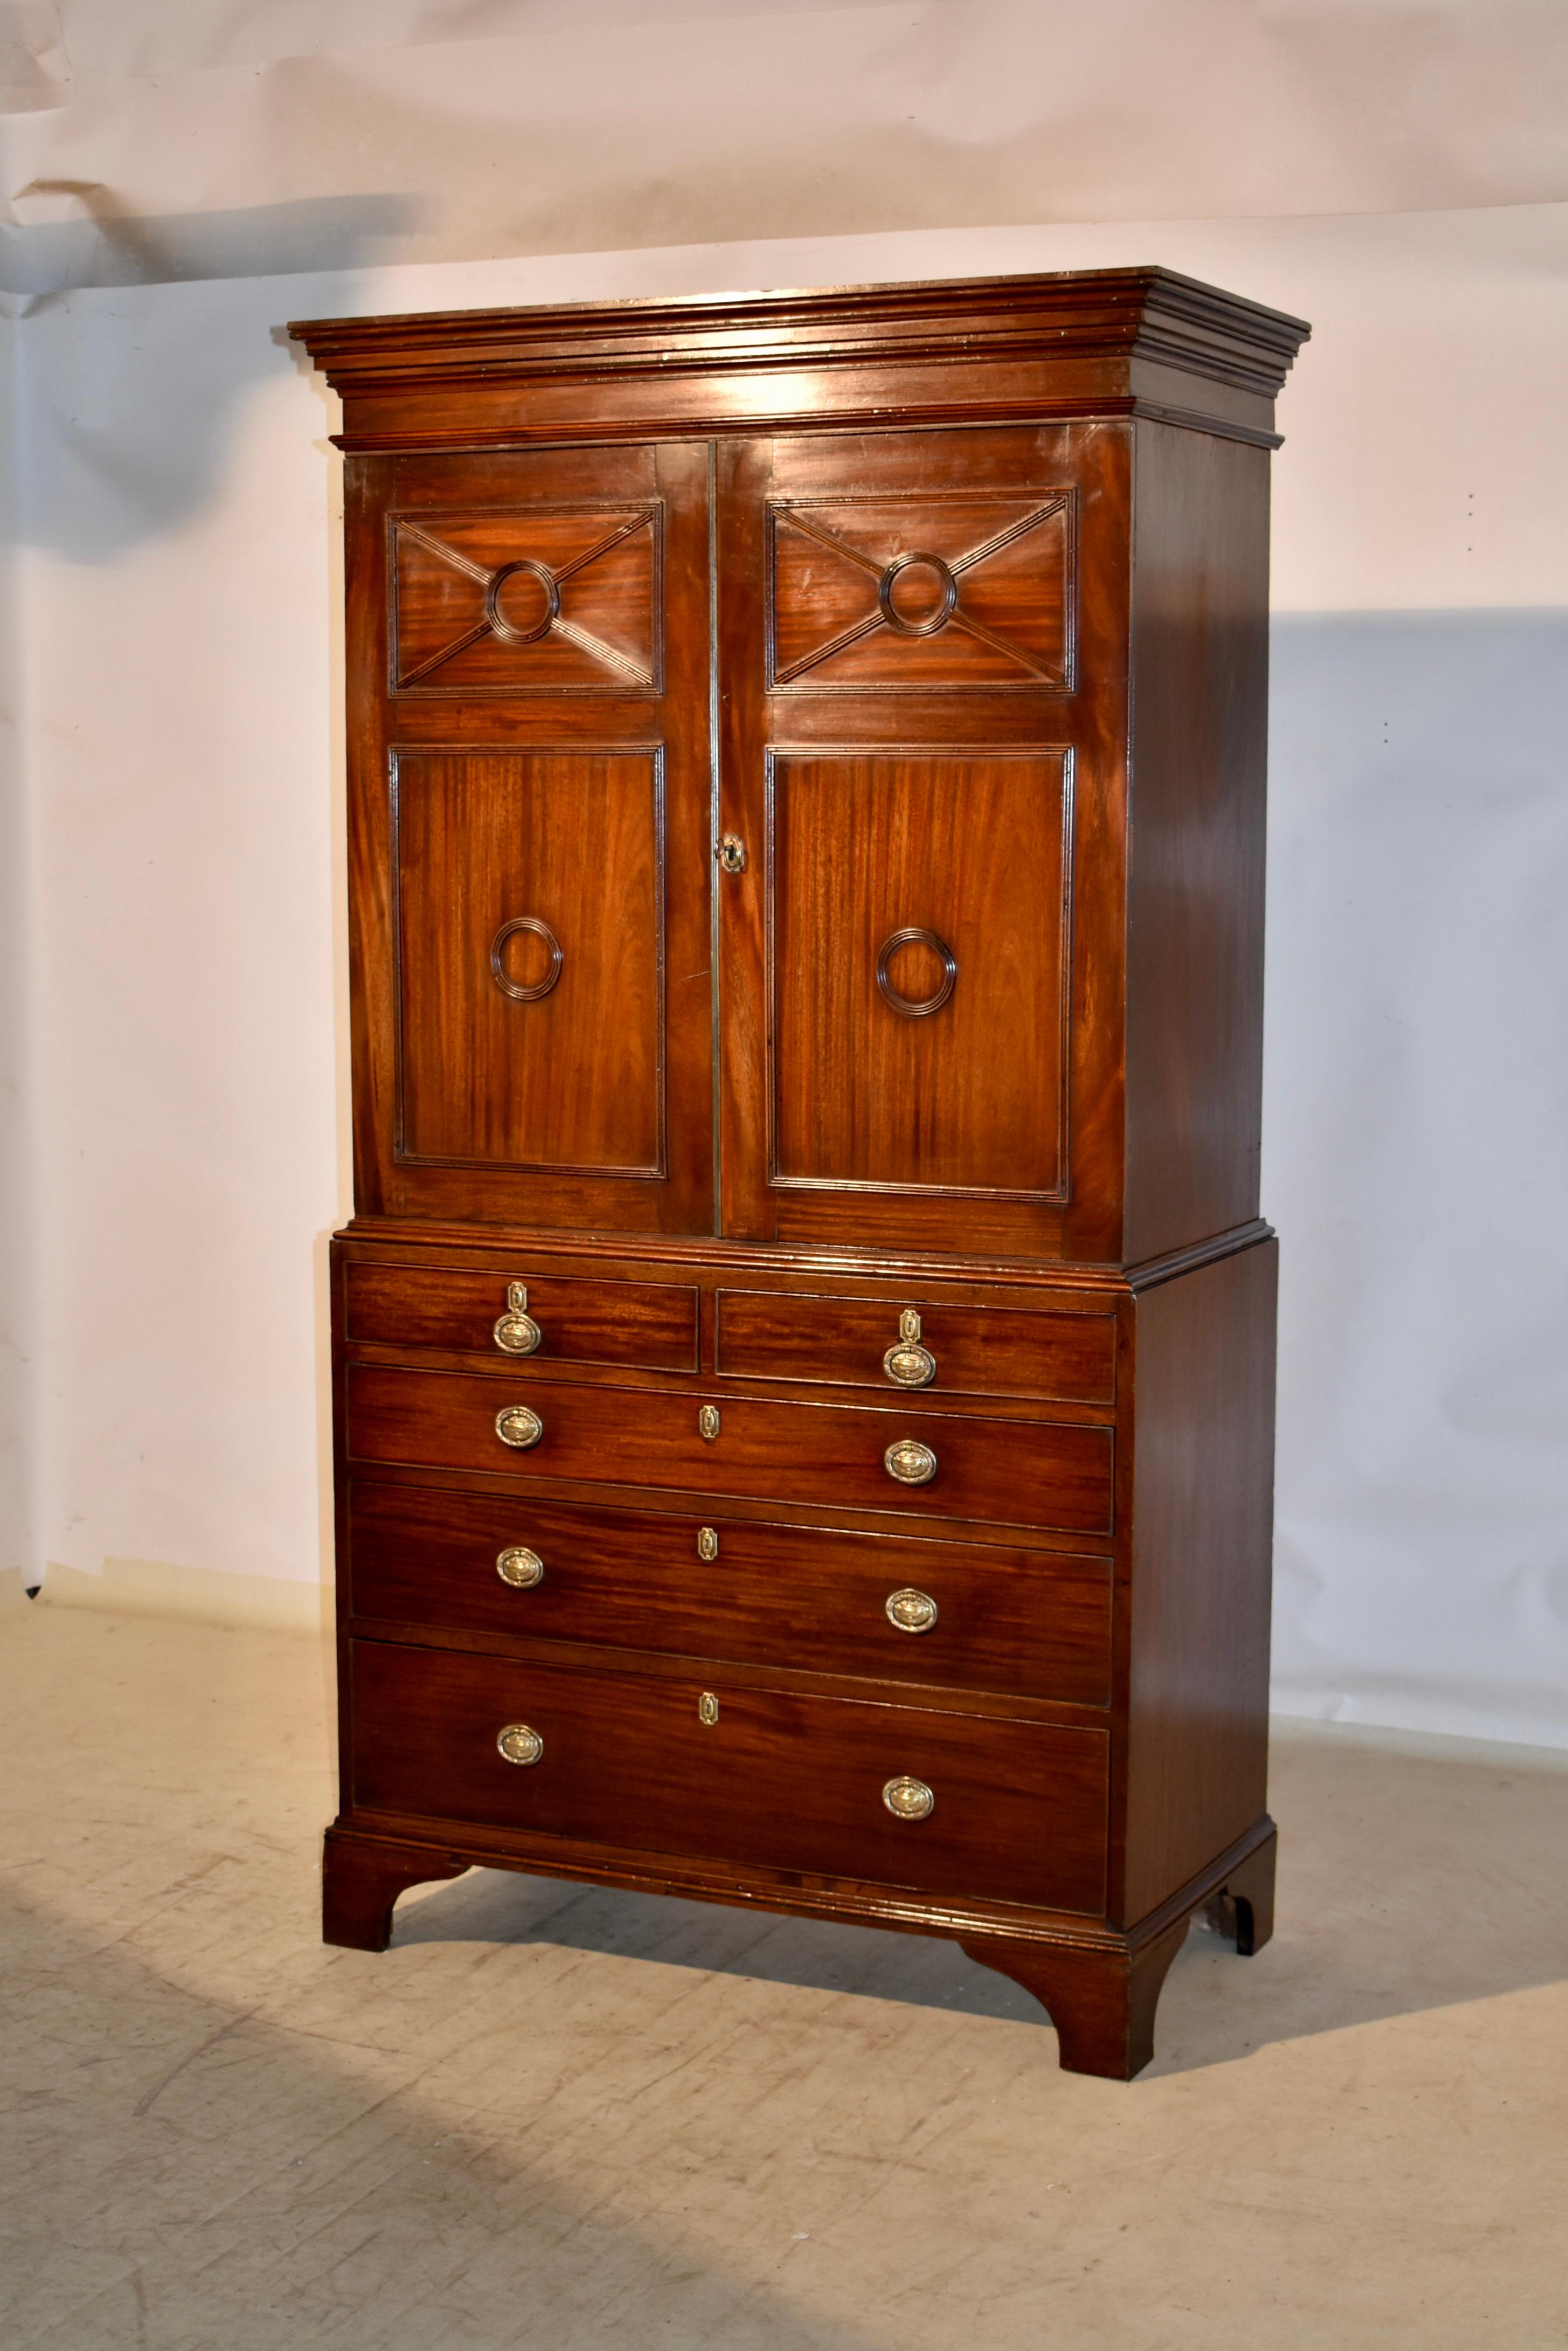 19th century linen press from England and made from mahogany.  The top has a lovely crown molding over simple sides, made from single boards.  The front has two hand paneled doors, which open to reveal three linen slide drawers, over the base which